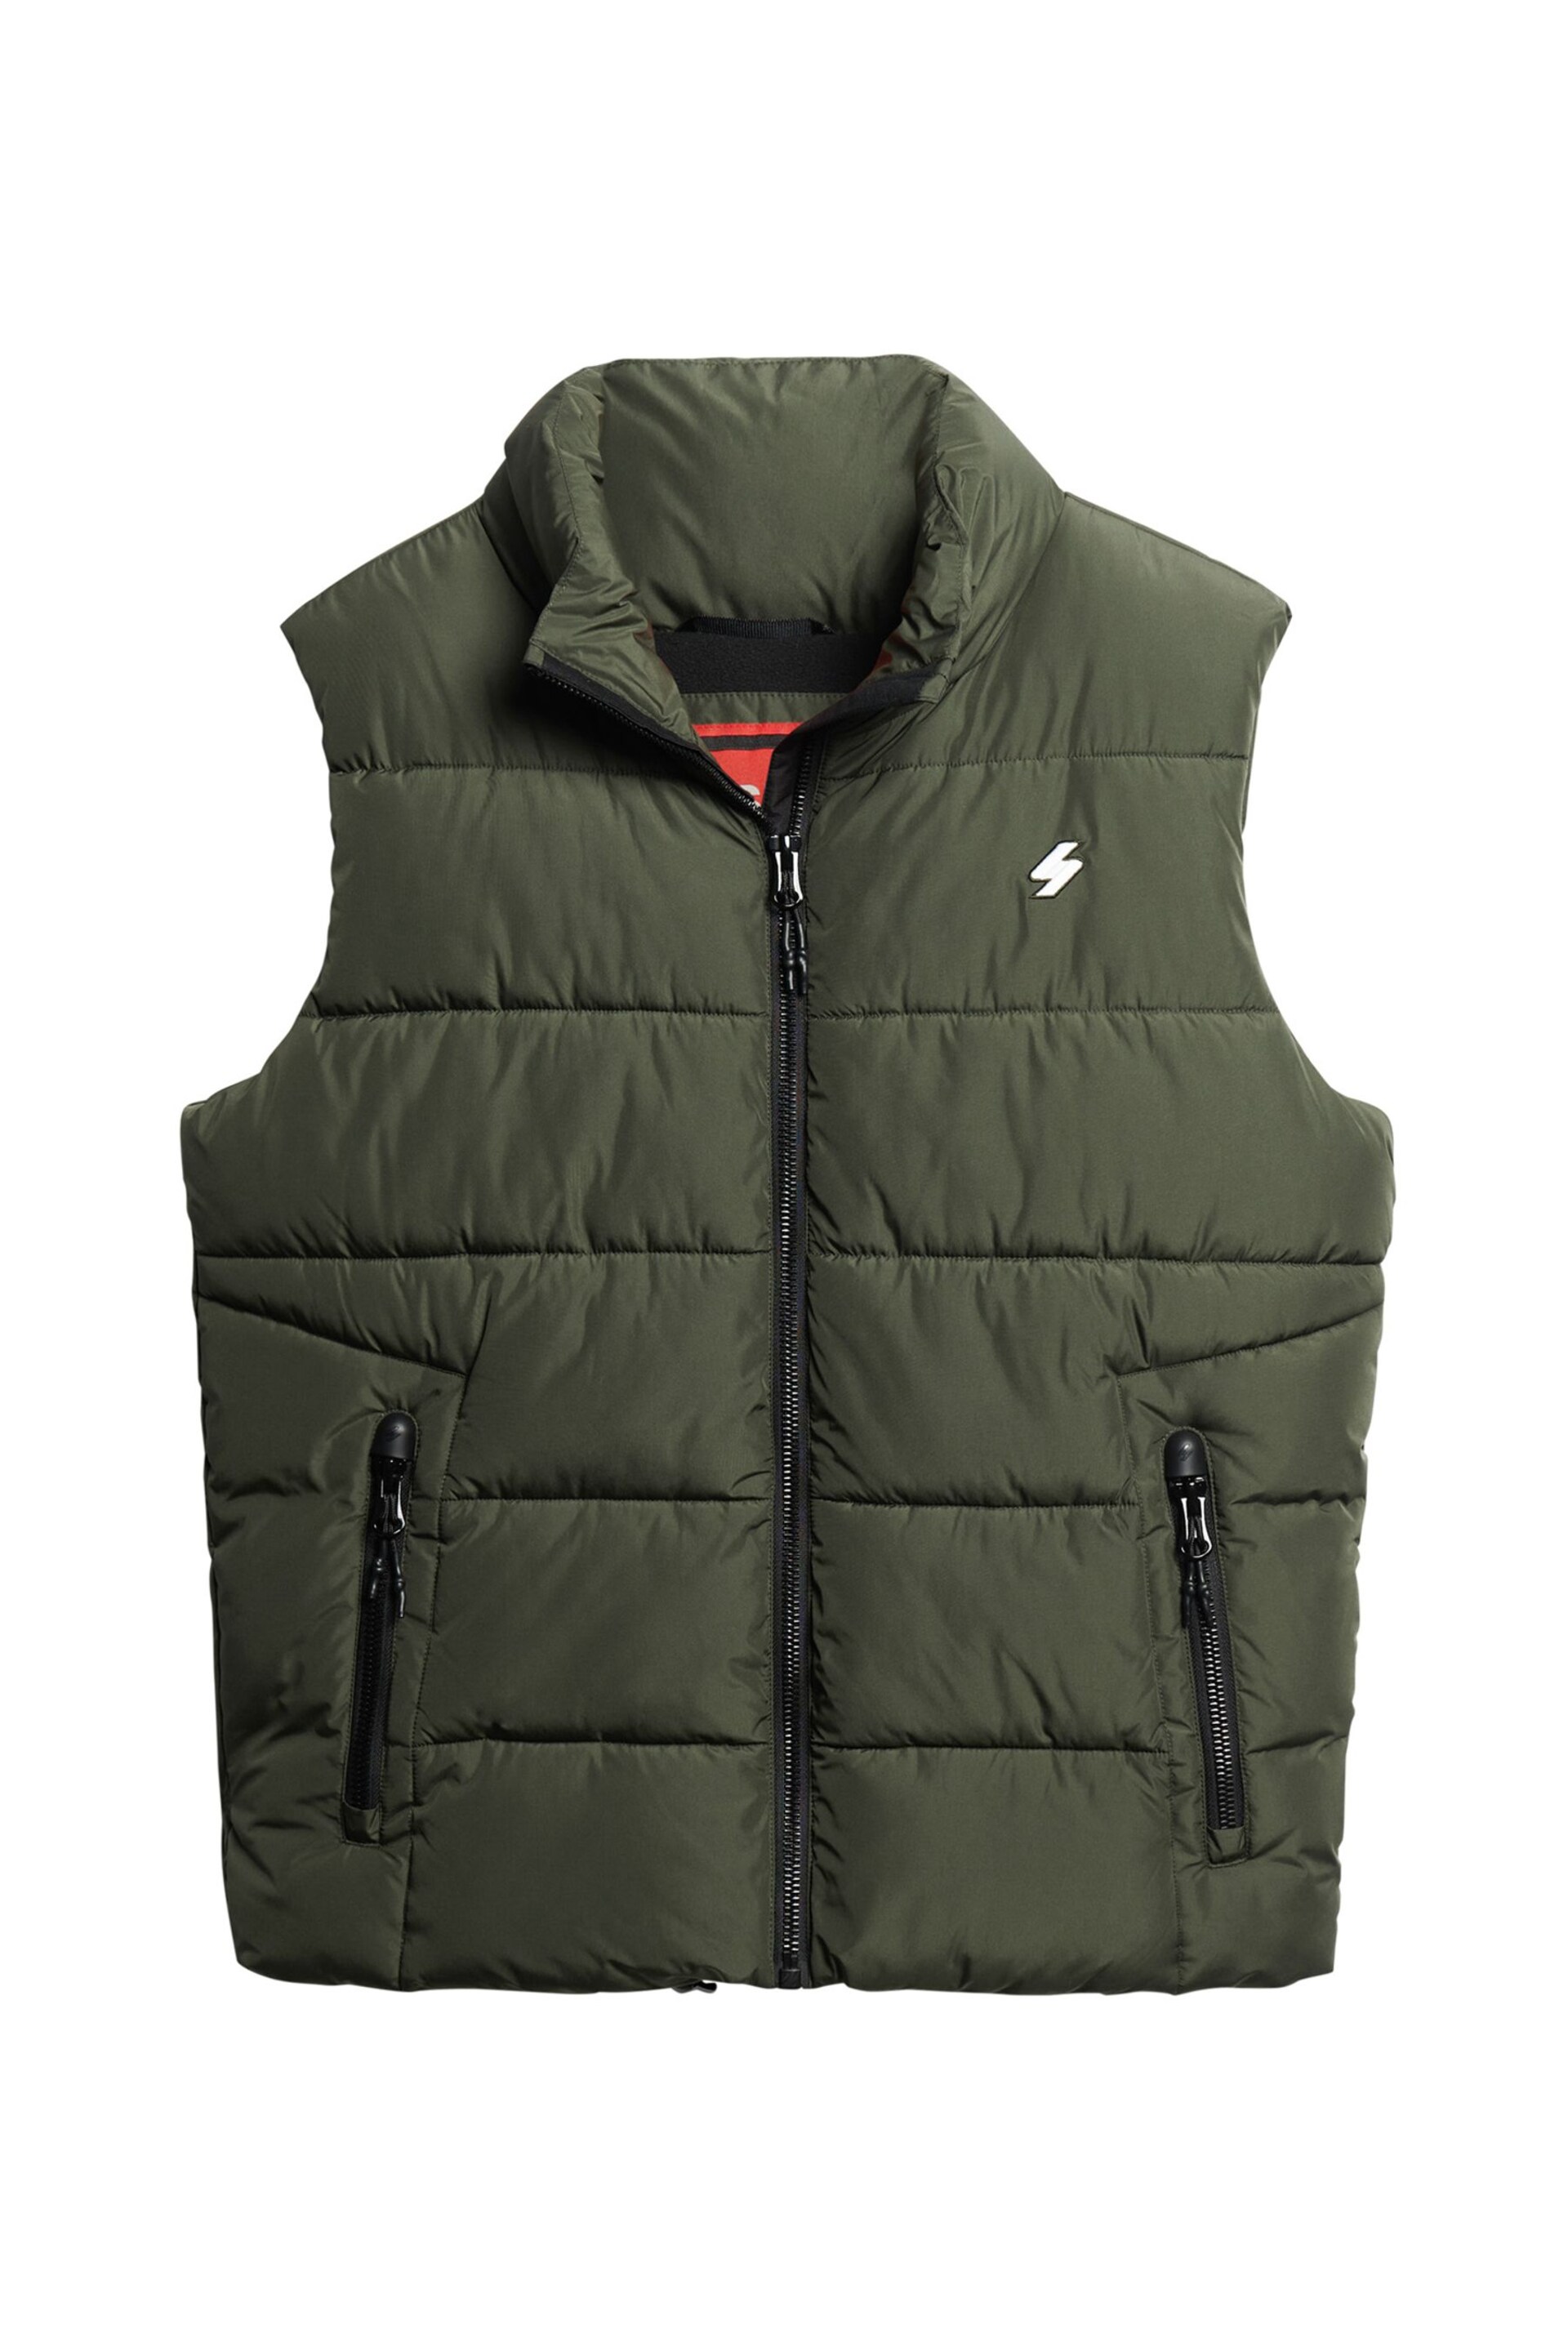 Superdry Green Sports Puffer Gilet - Image 7 of 9